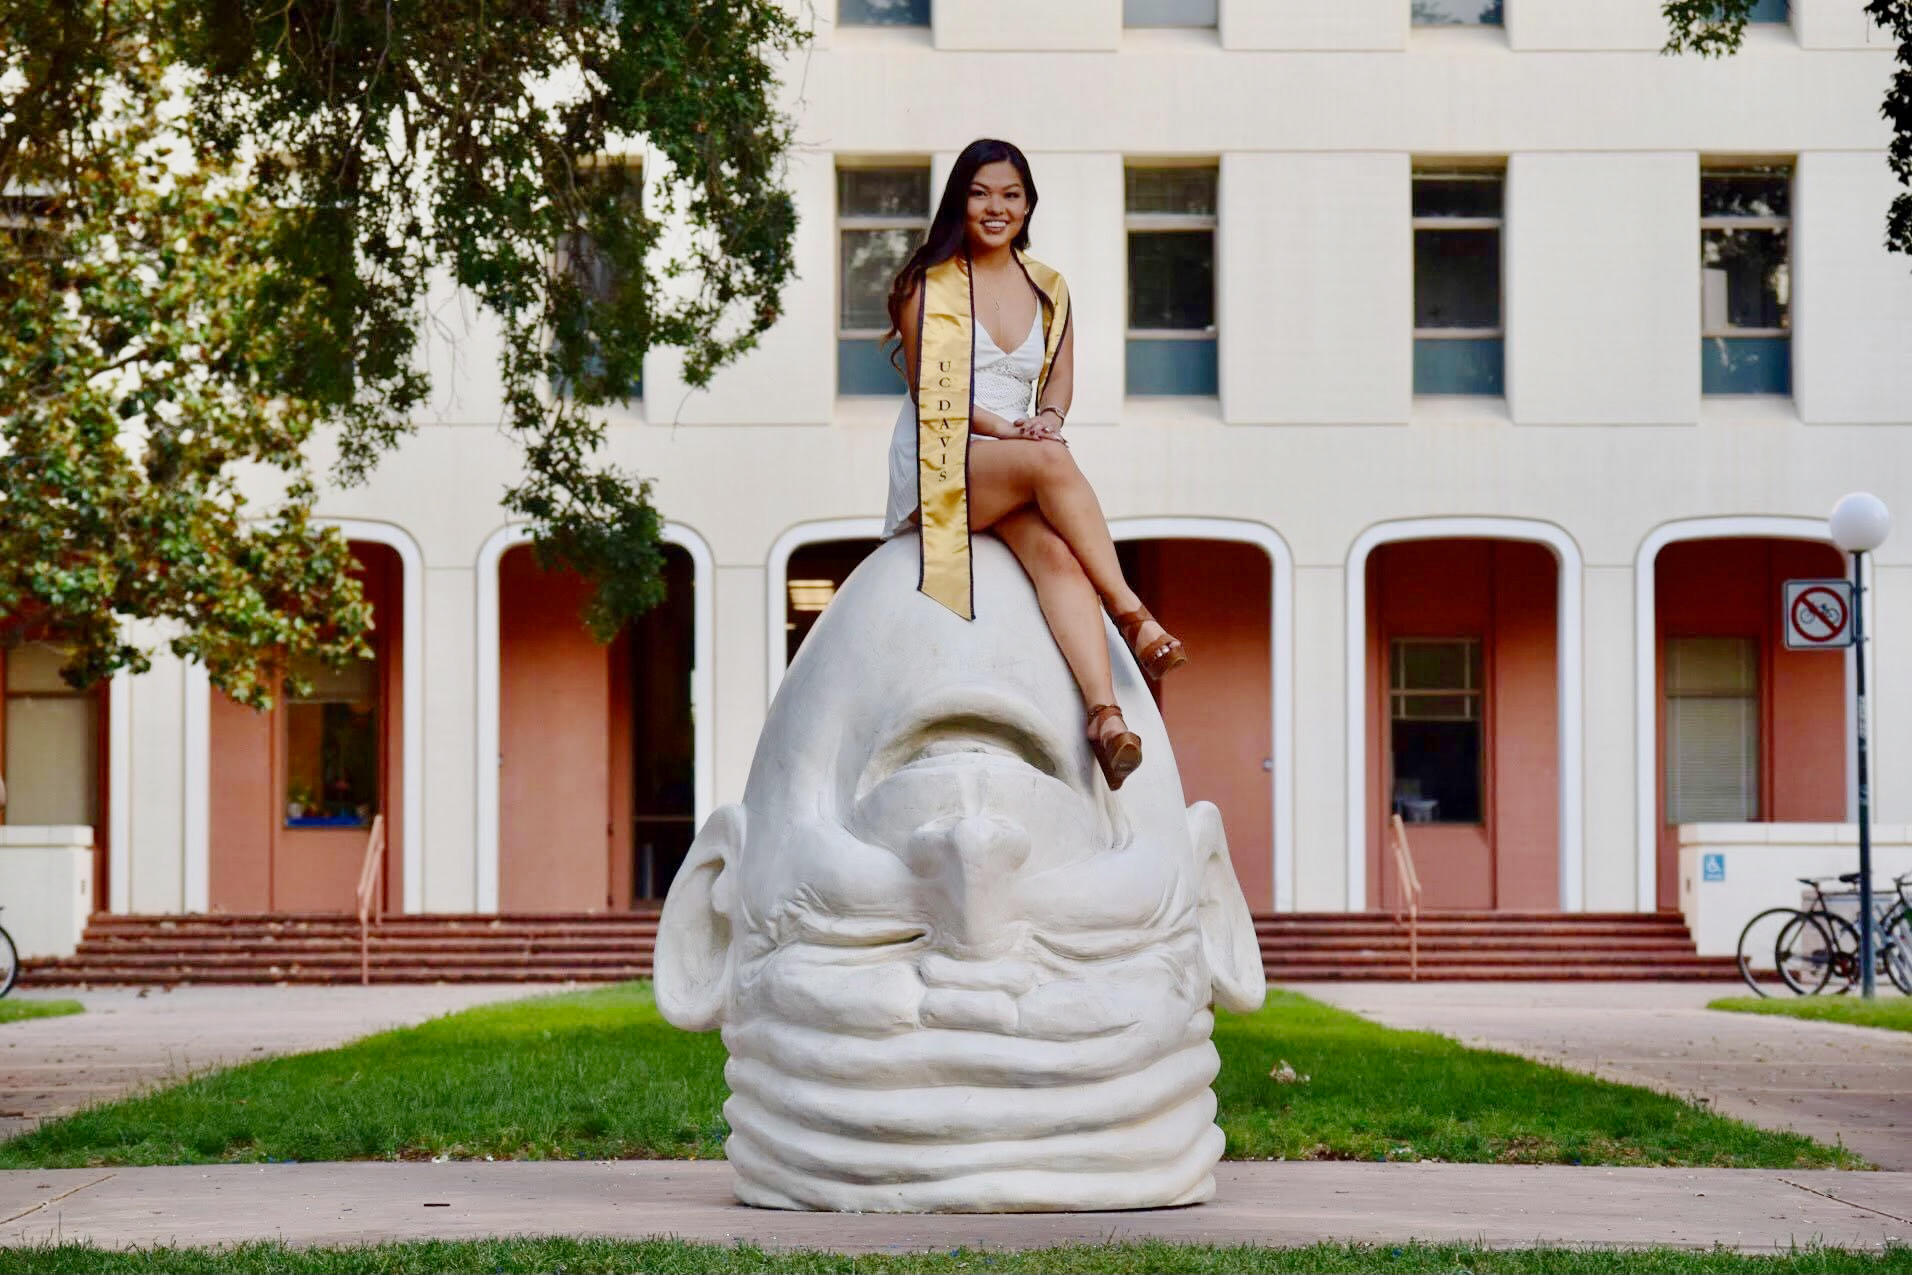 A person wearing a graduation sash sitting on top of a large outdoor sculpture